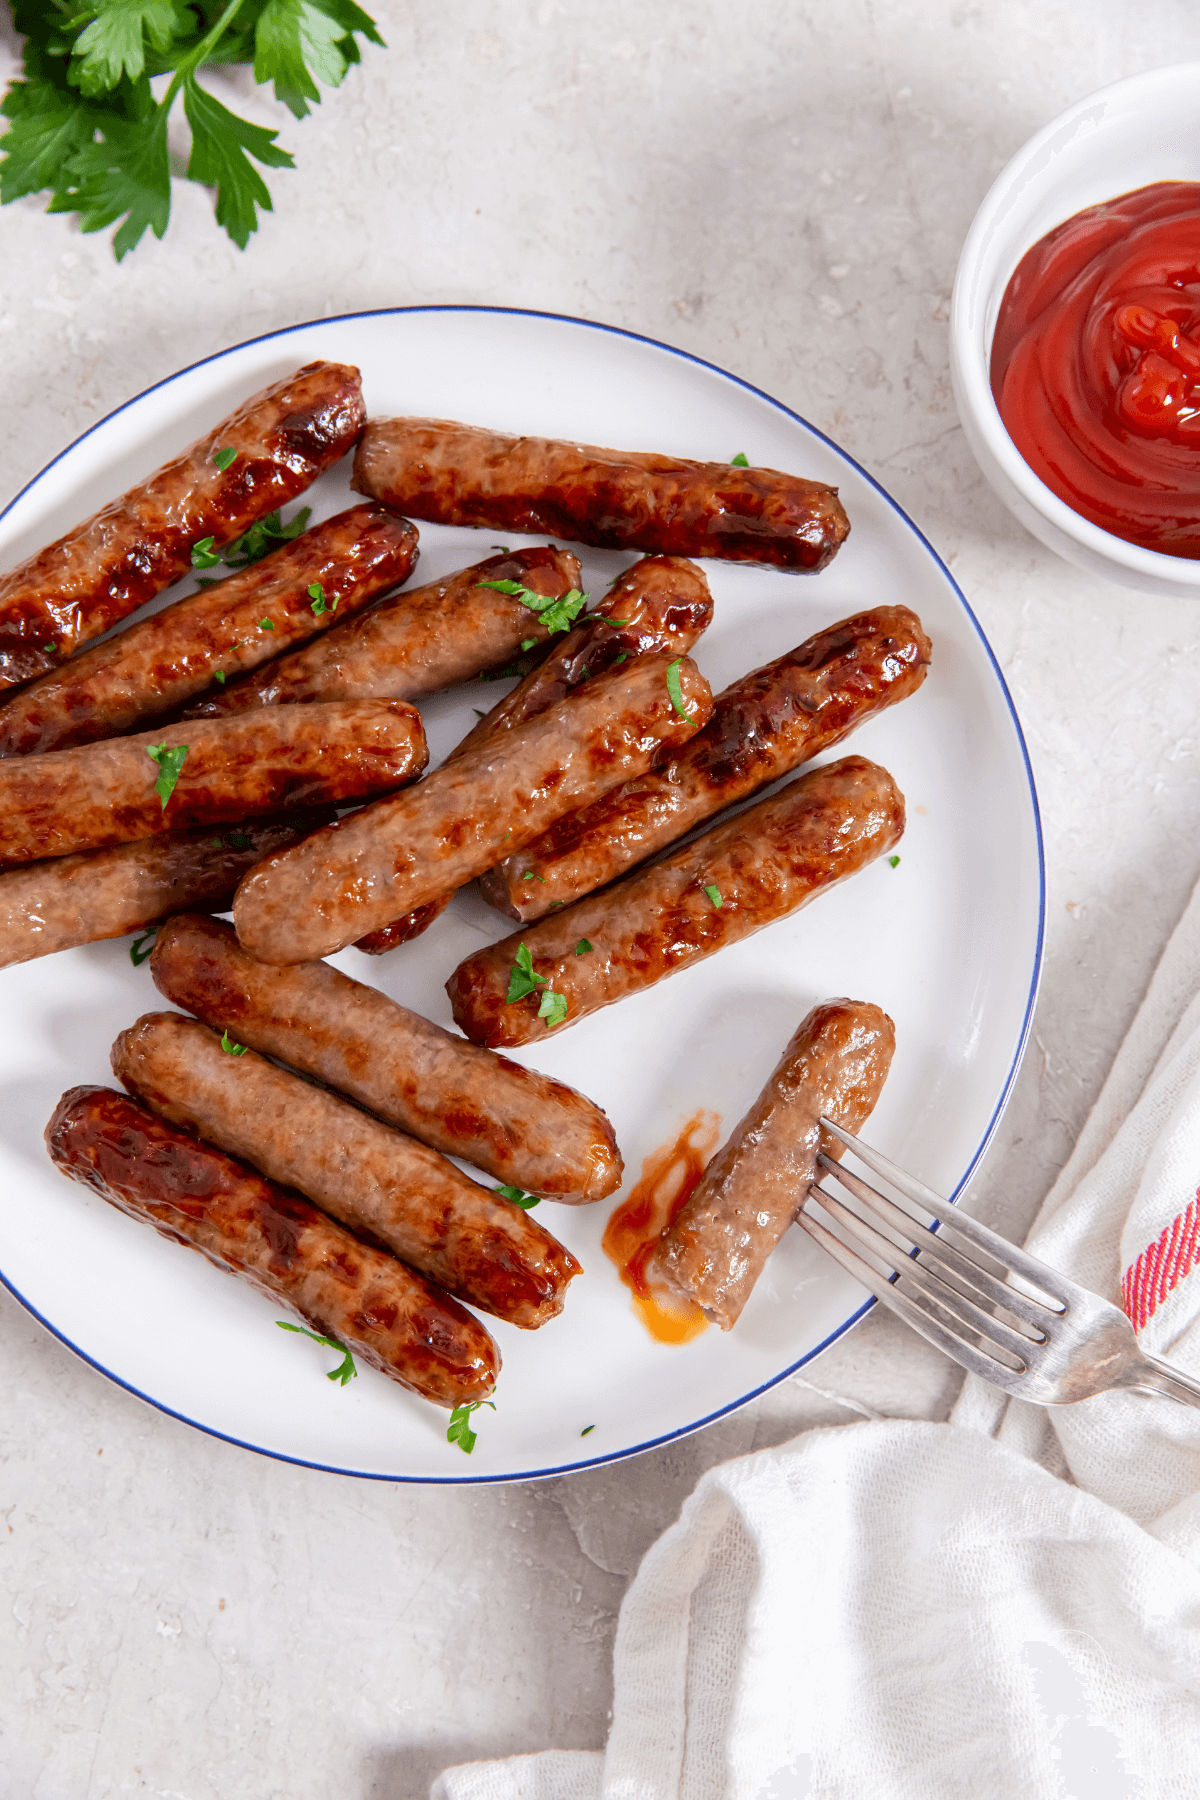 Sausage links made in air fryer on plate with ketchup.